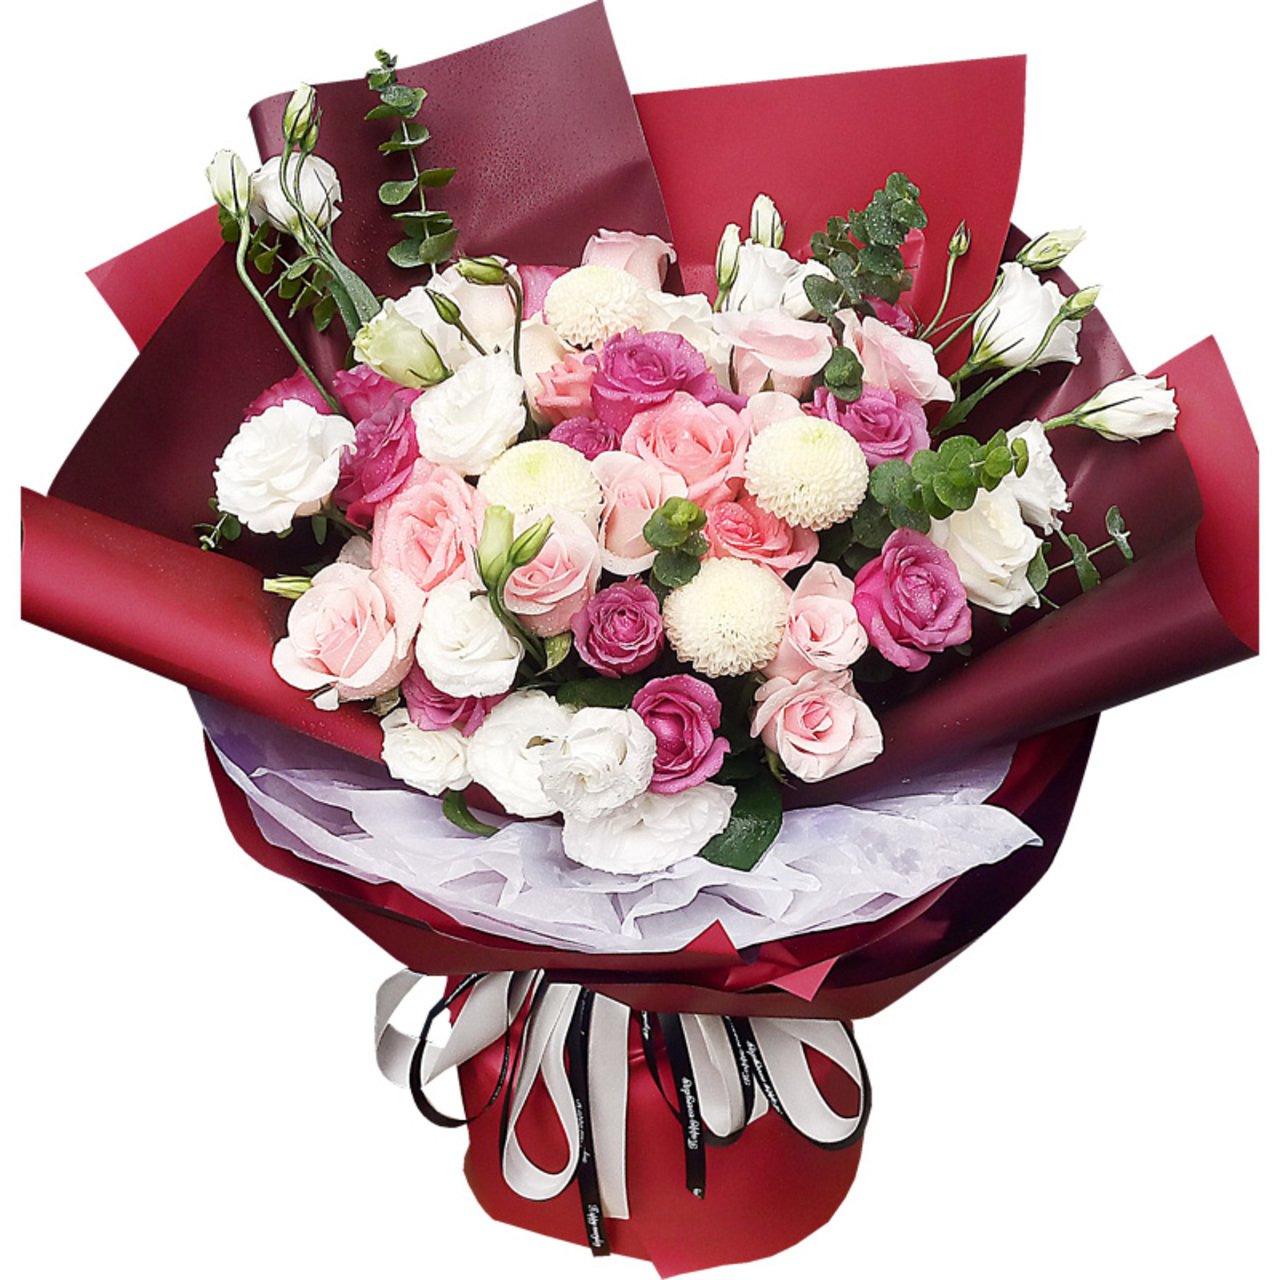 Have a soft spot(
13 pink snow mountains, 13 pink roses, 7 white roses, 4 ping-pong chrysanthemums-